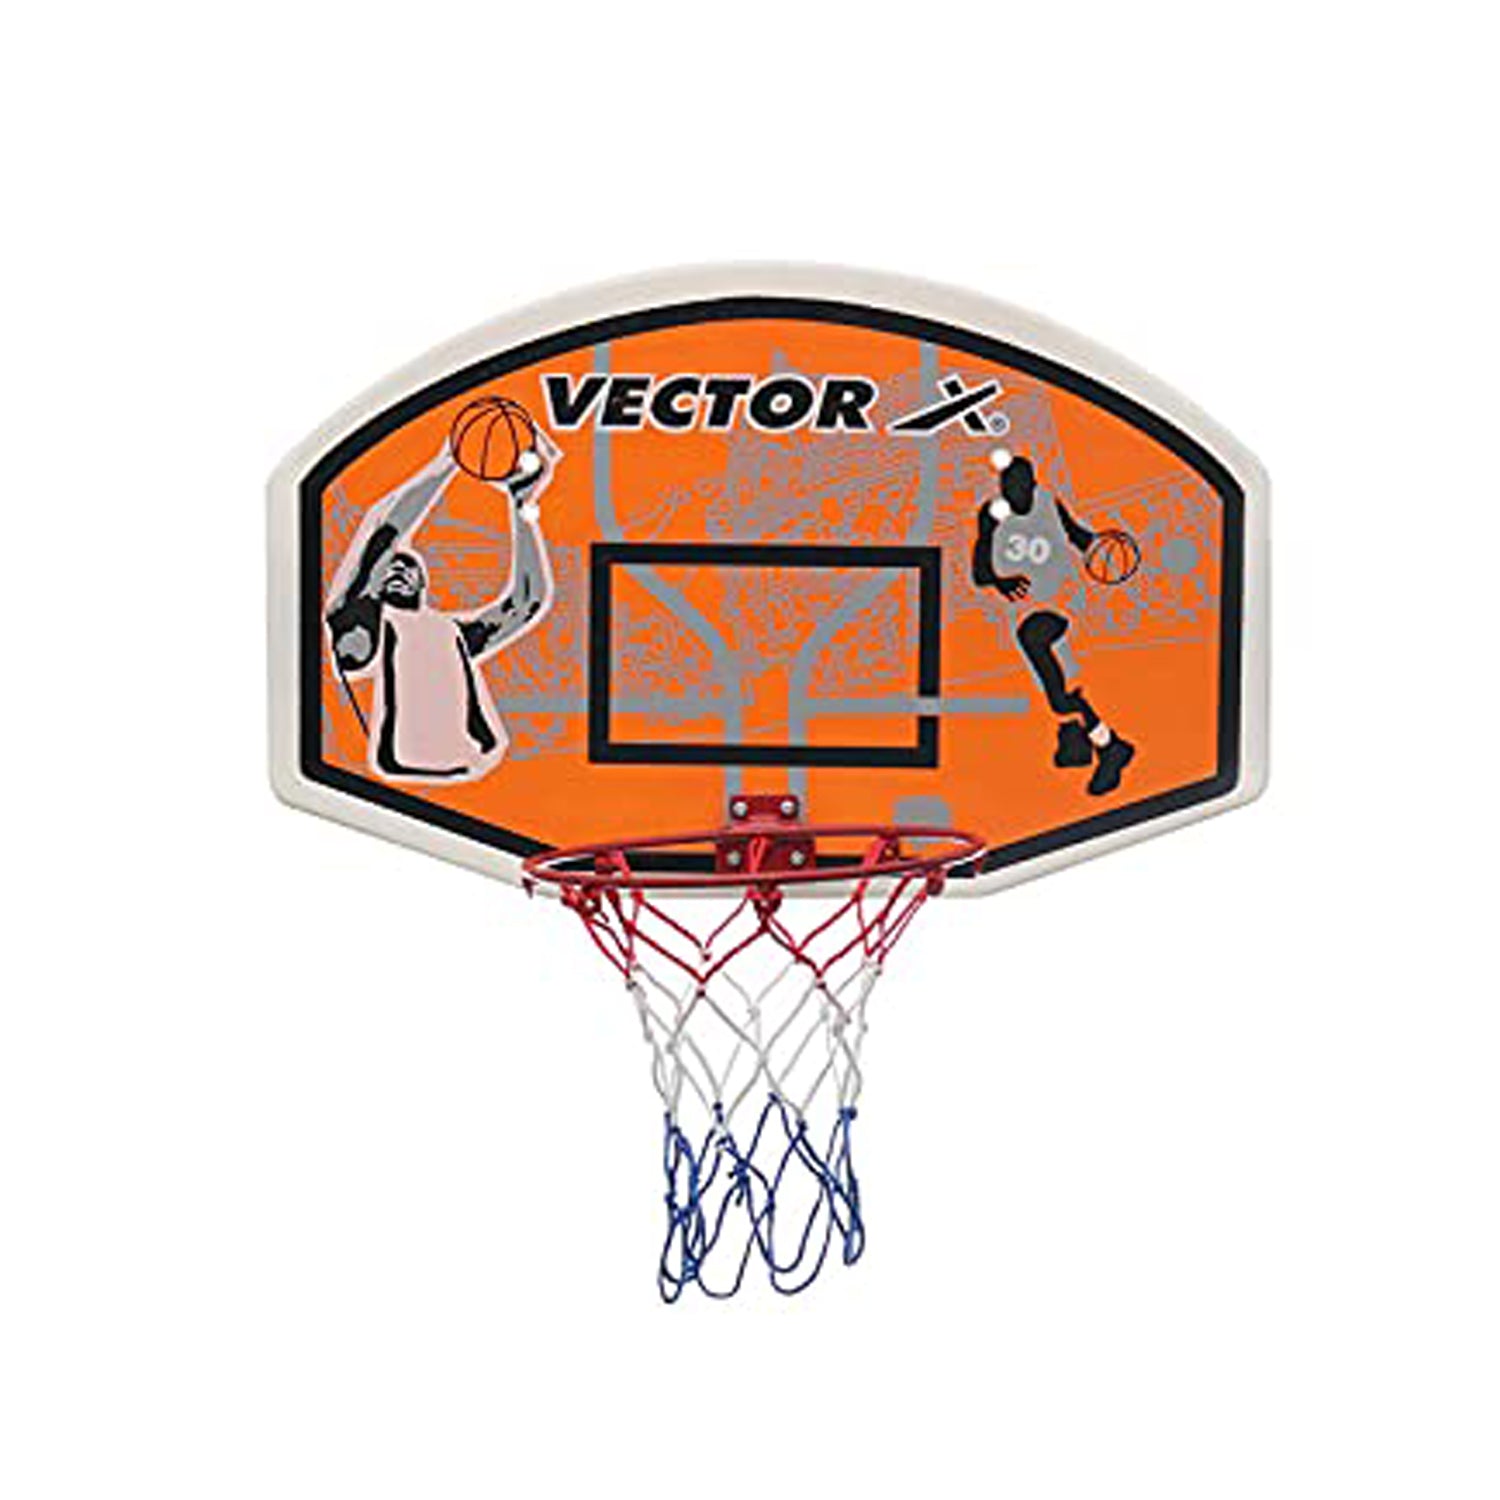 Vector X Basketball Board and Ring XL - Best Price online Prokicksports.com